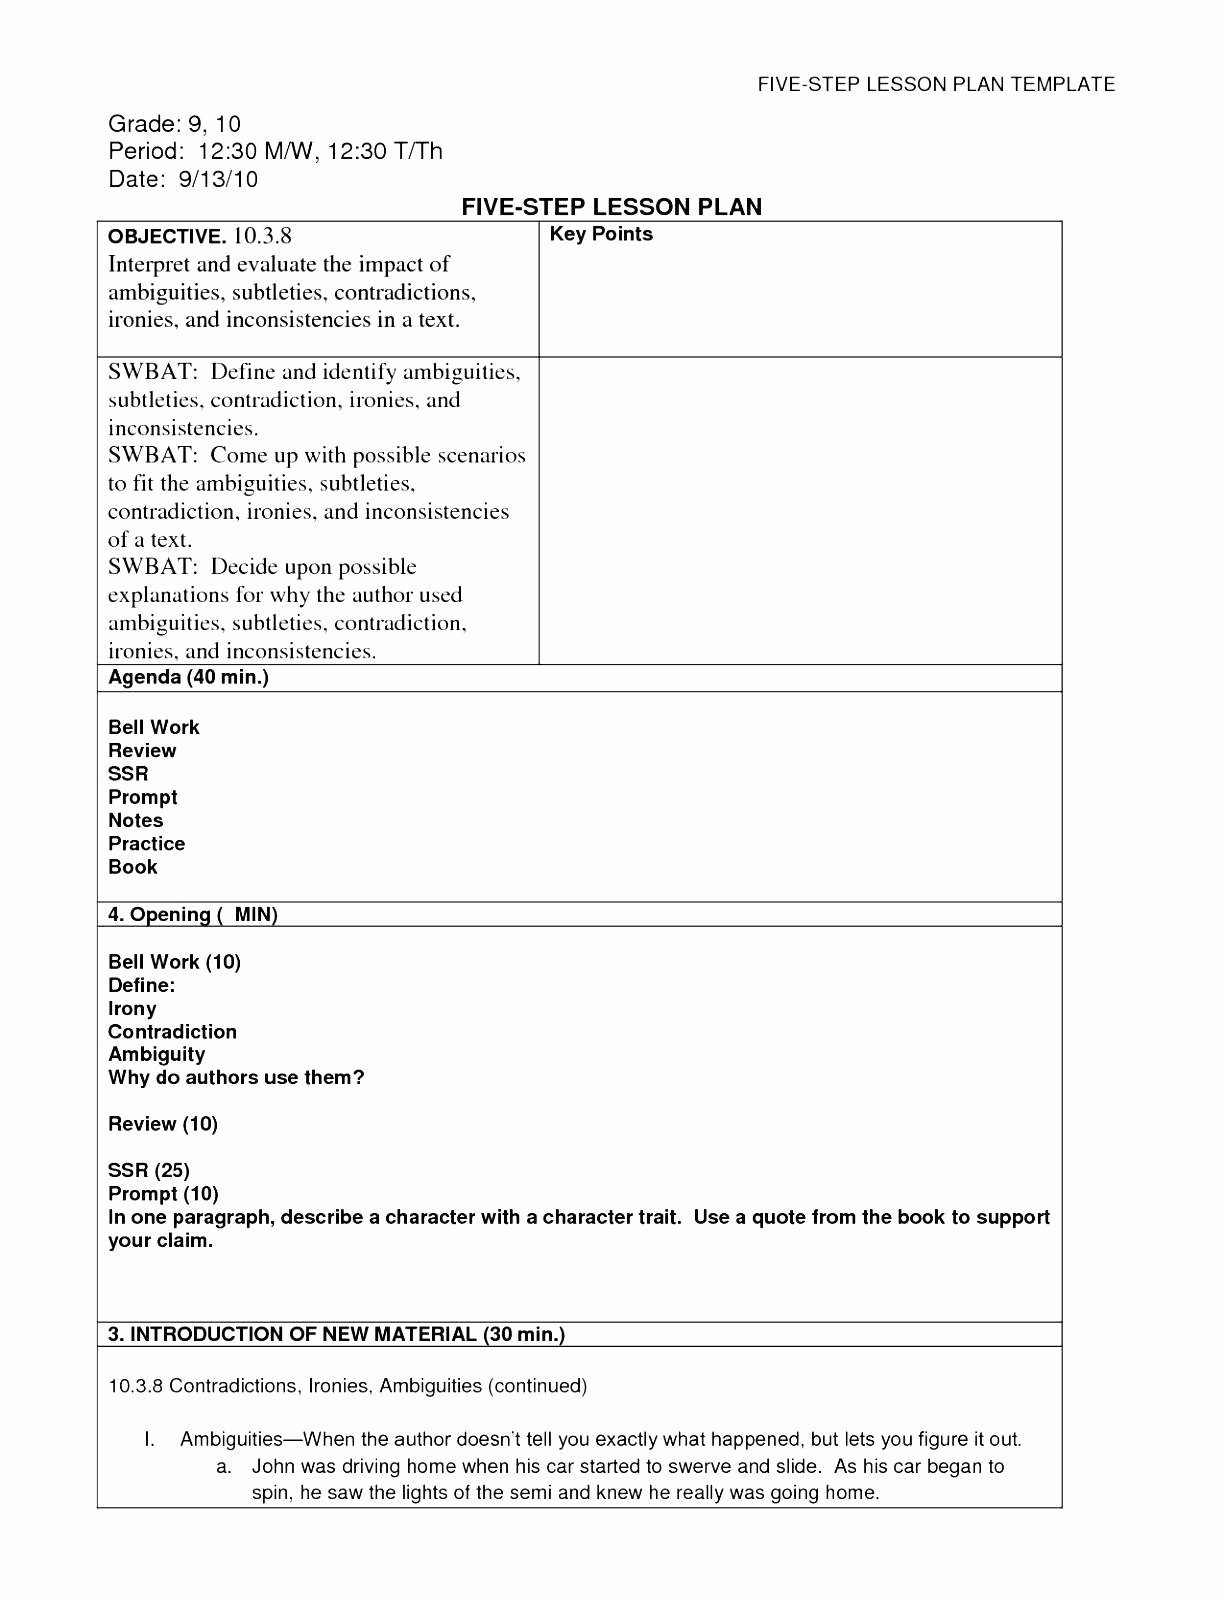 Inquiry Lesson Plan Template Best Of 5 Point Lesson Plan Template – Inquiry Lesson Plan